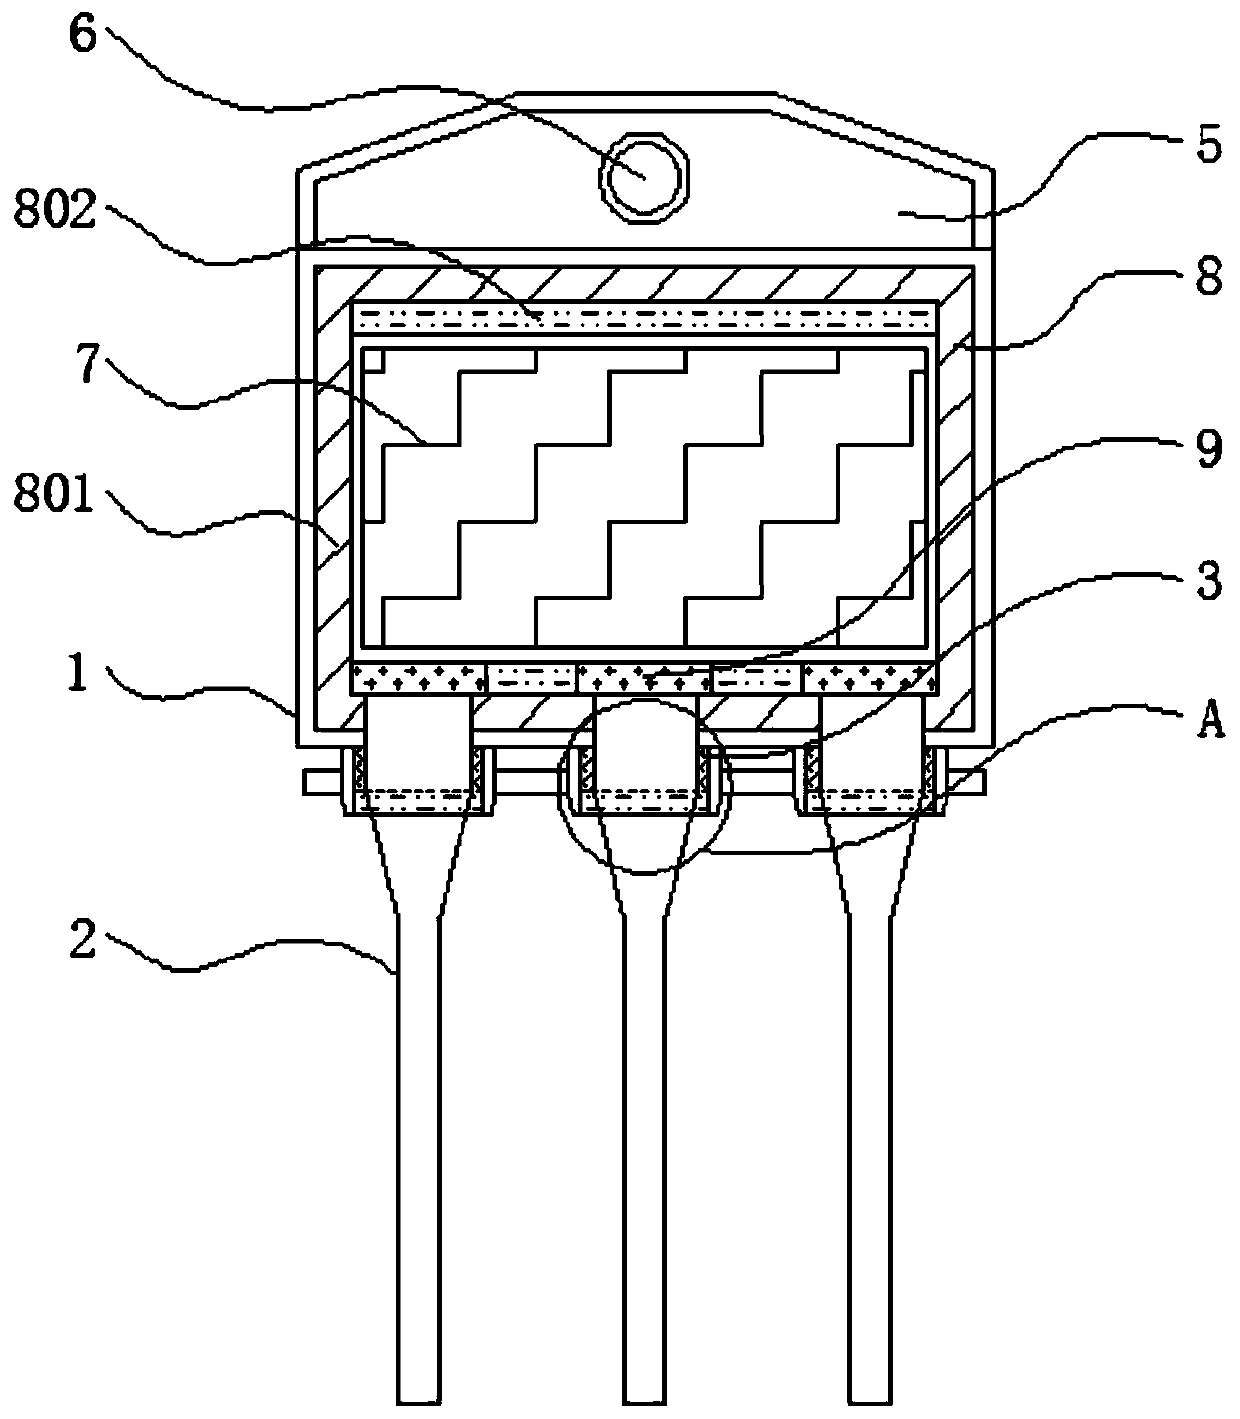 Efficient surface-mounted triode with good heat dissipation structure